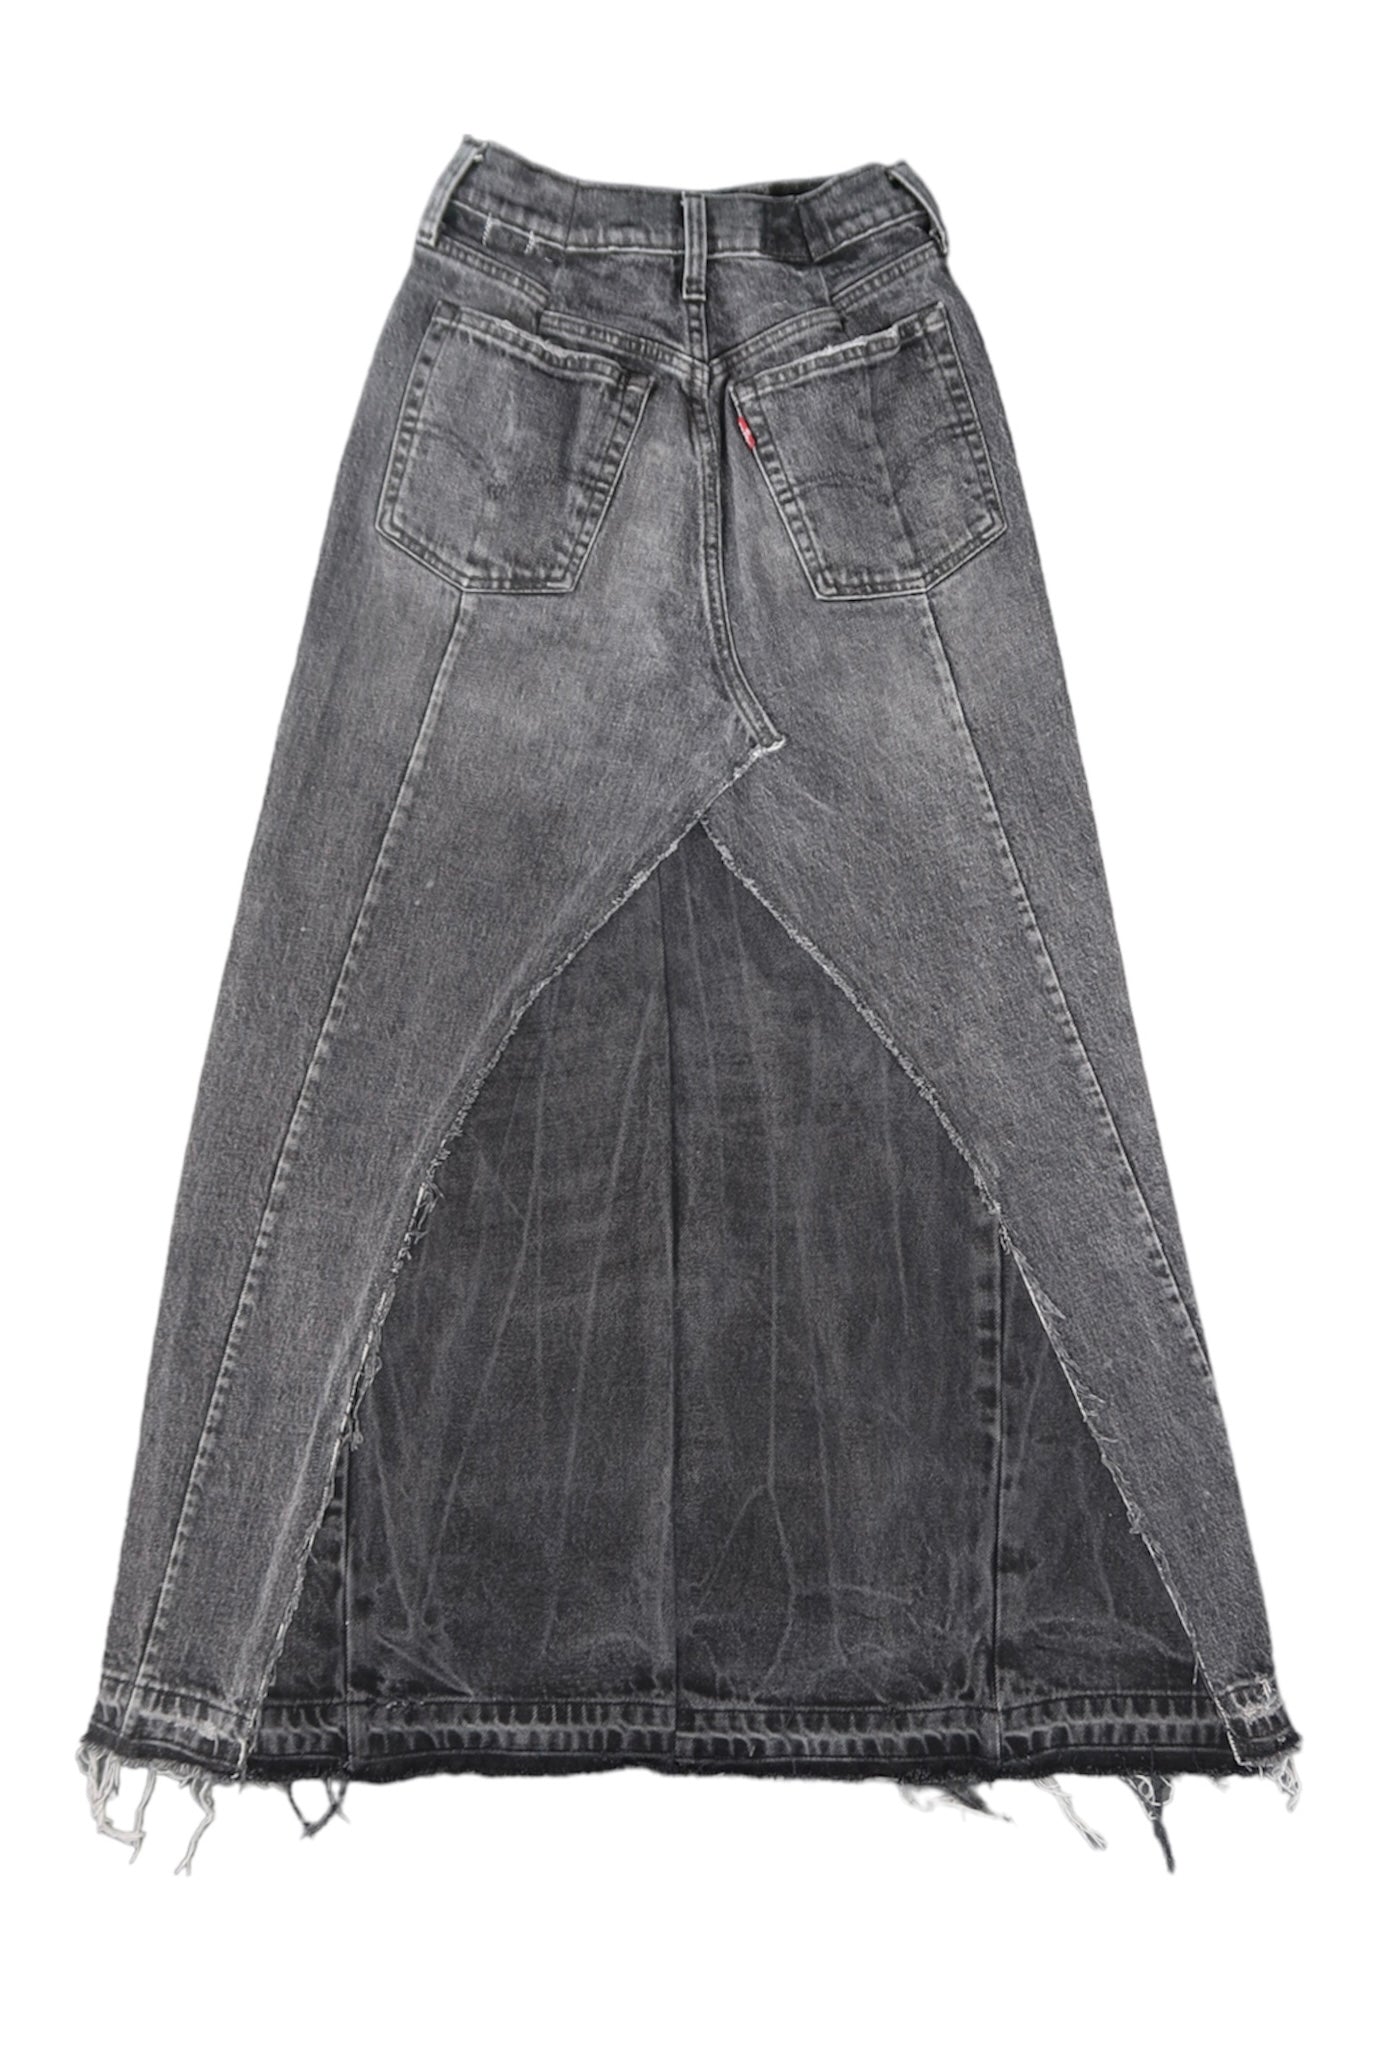 Levi's Icon high waisted denim skirt in washed black | ASOS